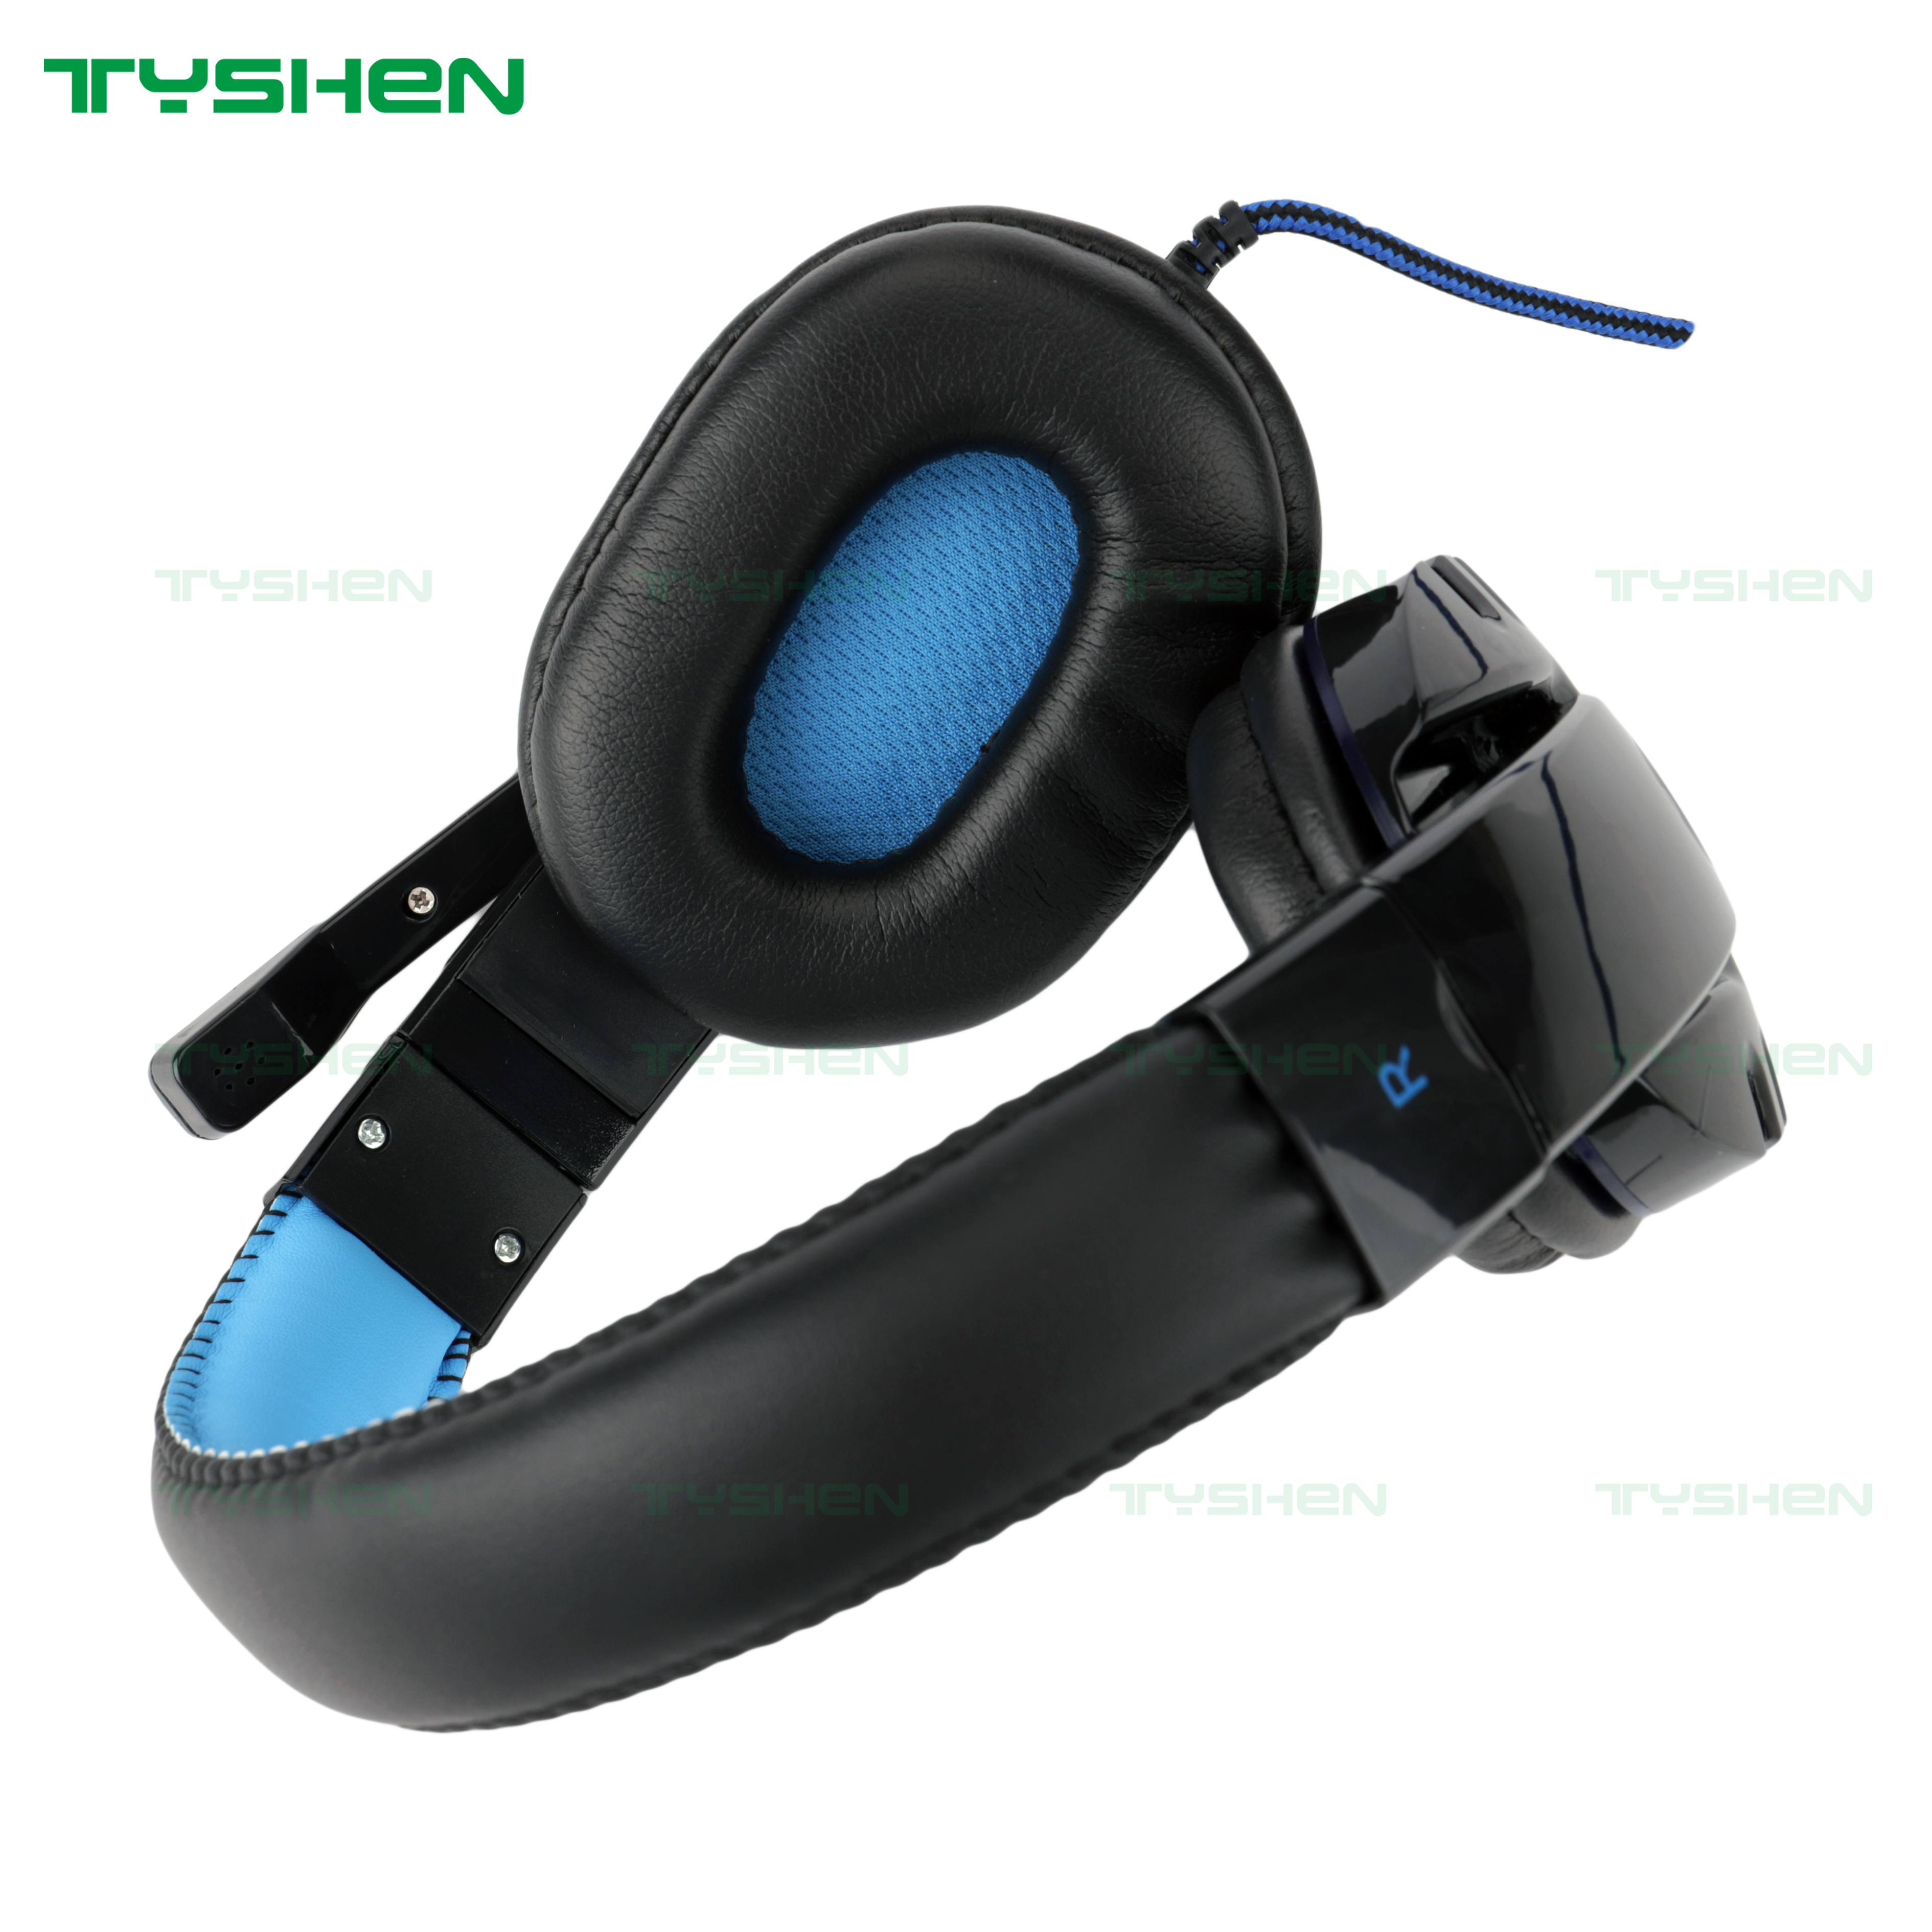 Computer Gaming Headset,LED Lighting,Low MOQ:30 Pcs,In Stock,Black&Blue Color